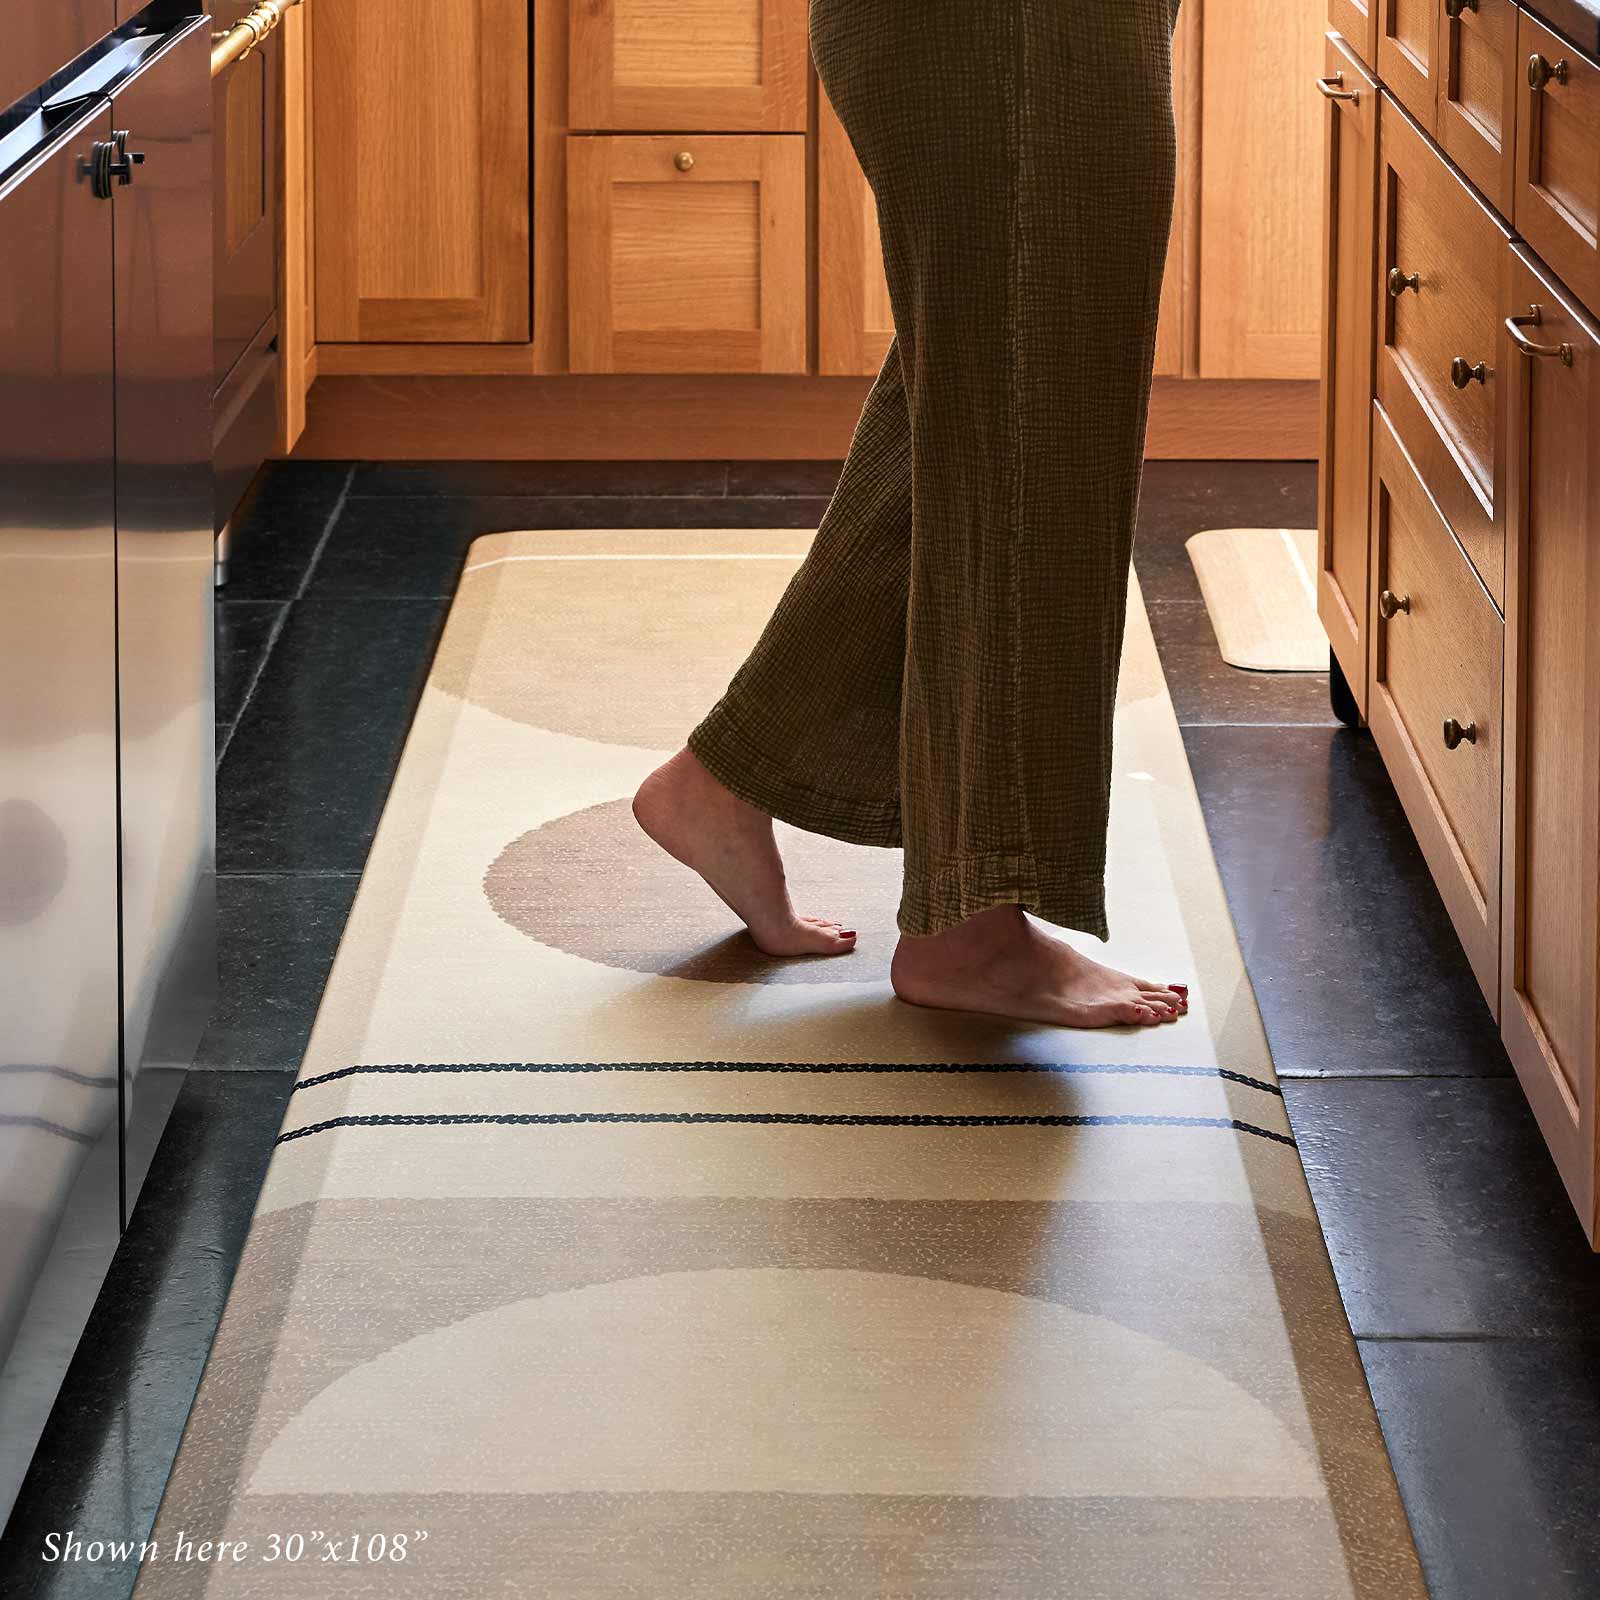 Geode Sesame beige, tan, and brown geometric line print standing mat in size 30x108 with woman's feet standing on the mat in front of a kitchen counter